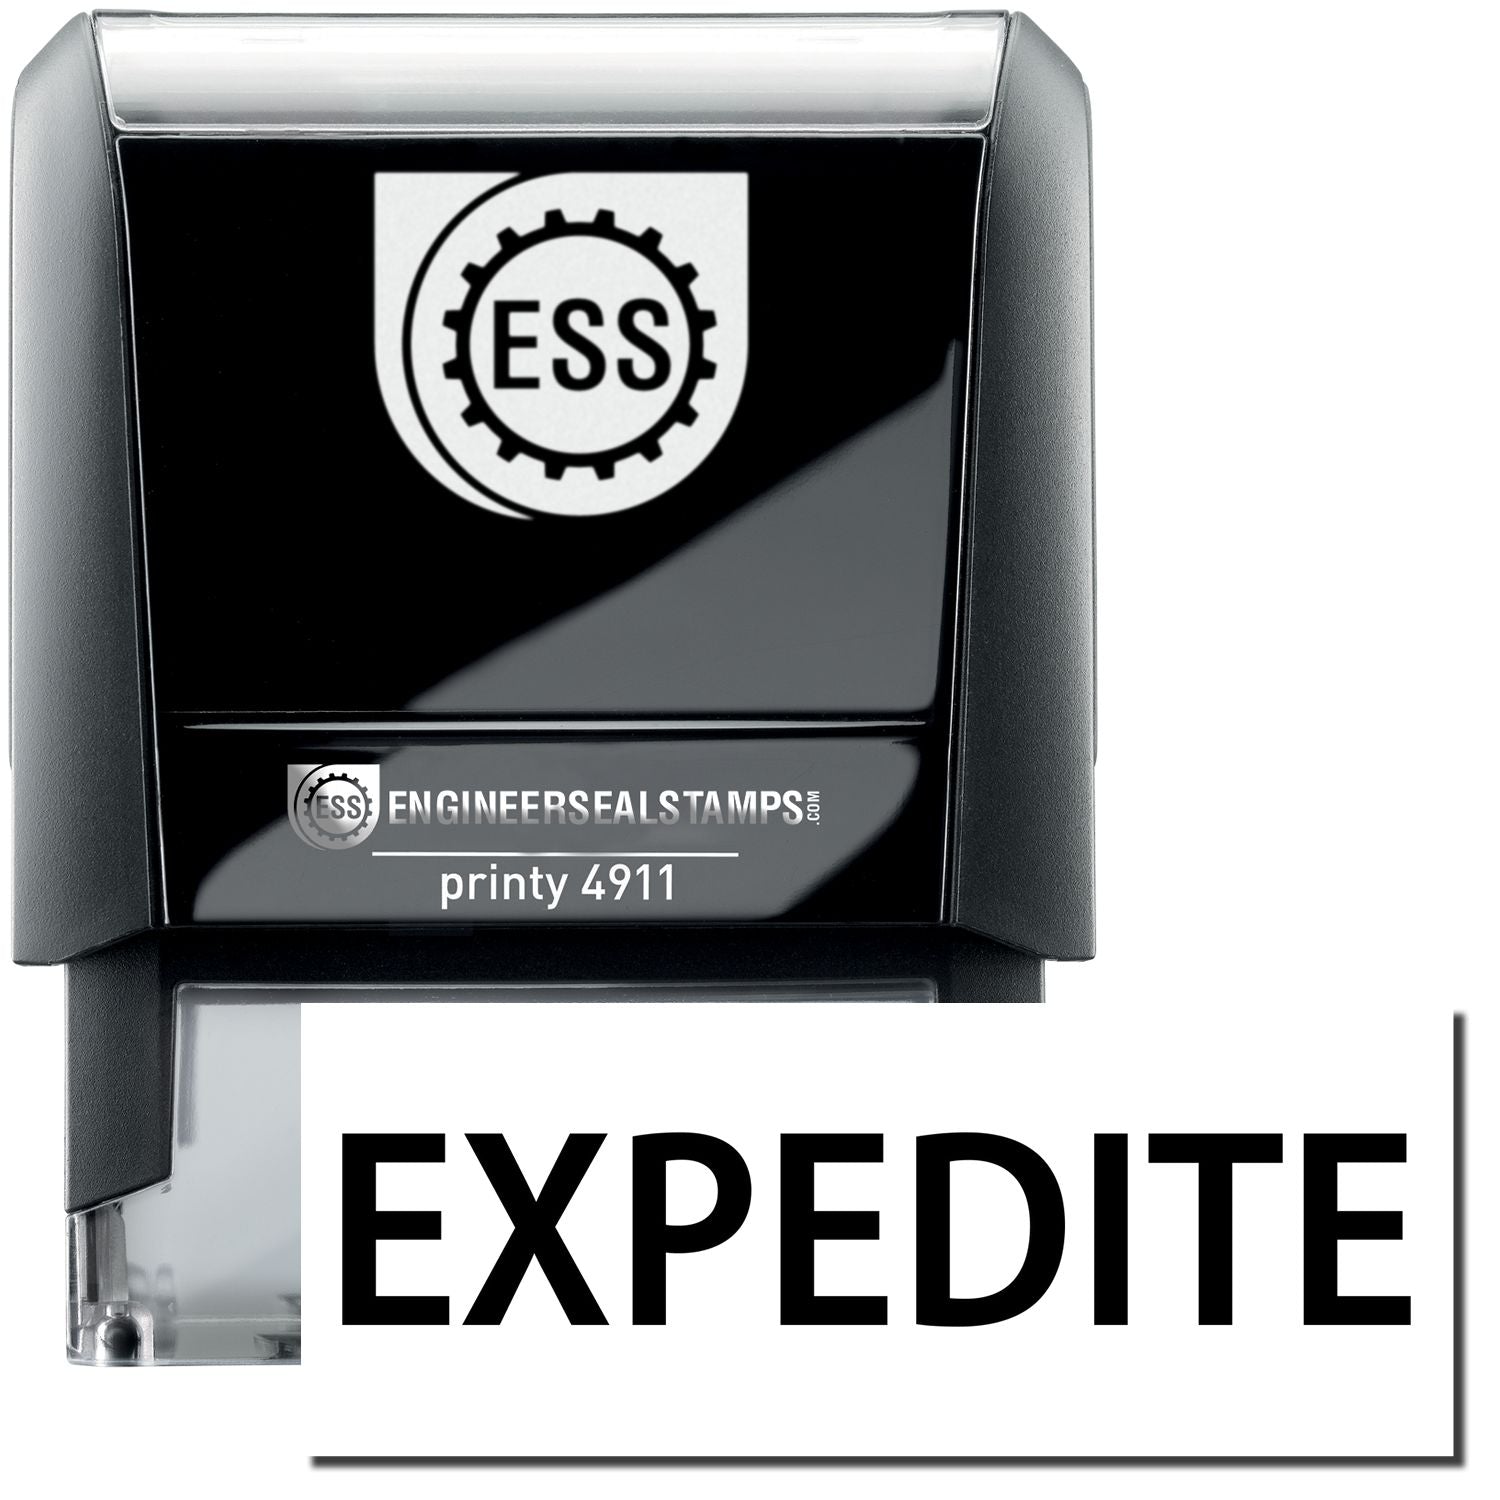 A self-inking stamp with a stamped image showing how the text "EXPEDITE" is displayed after stamping.